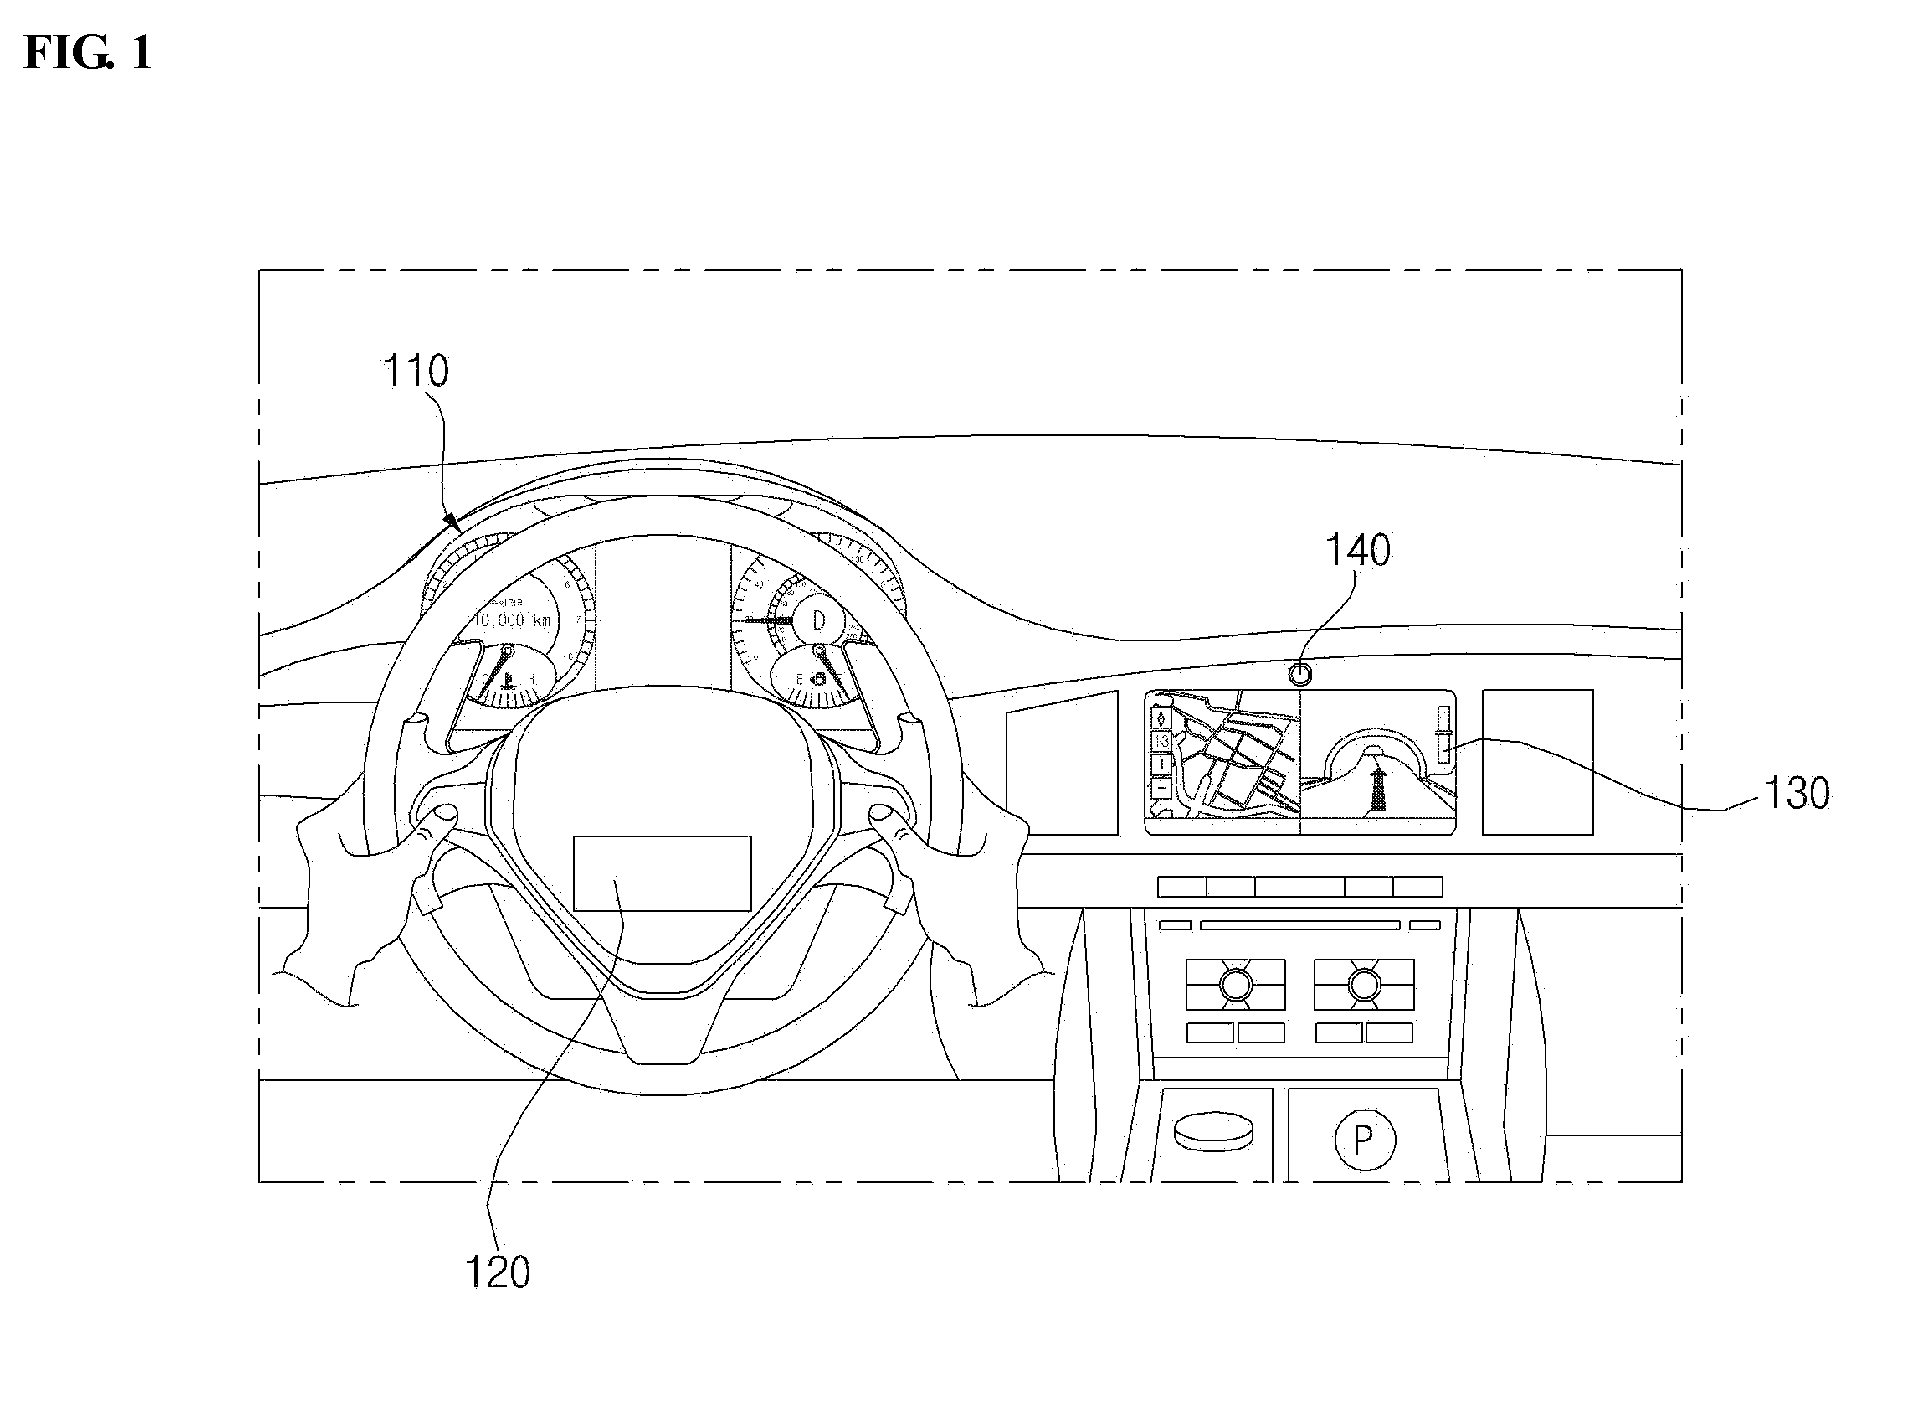 Integrated multimedia device for vehicle